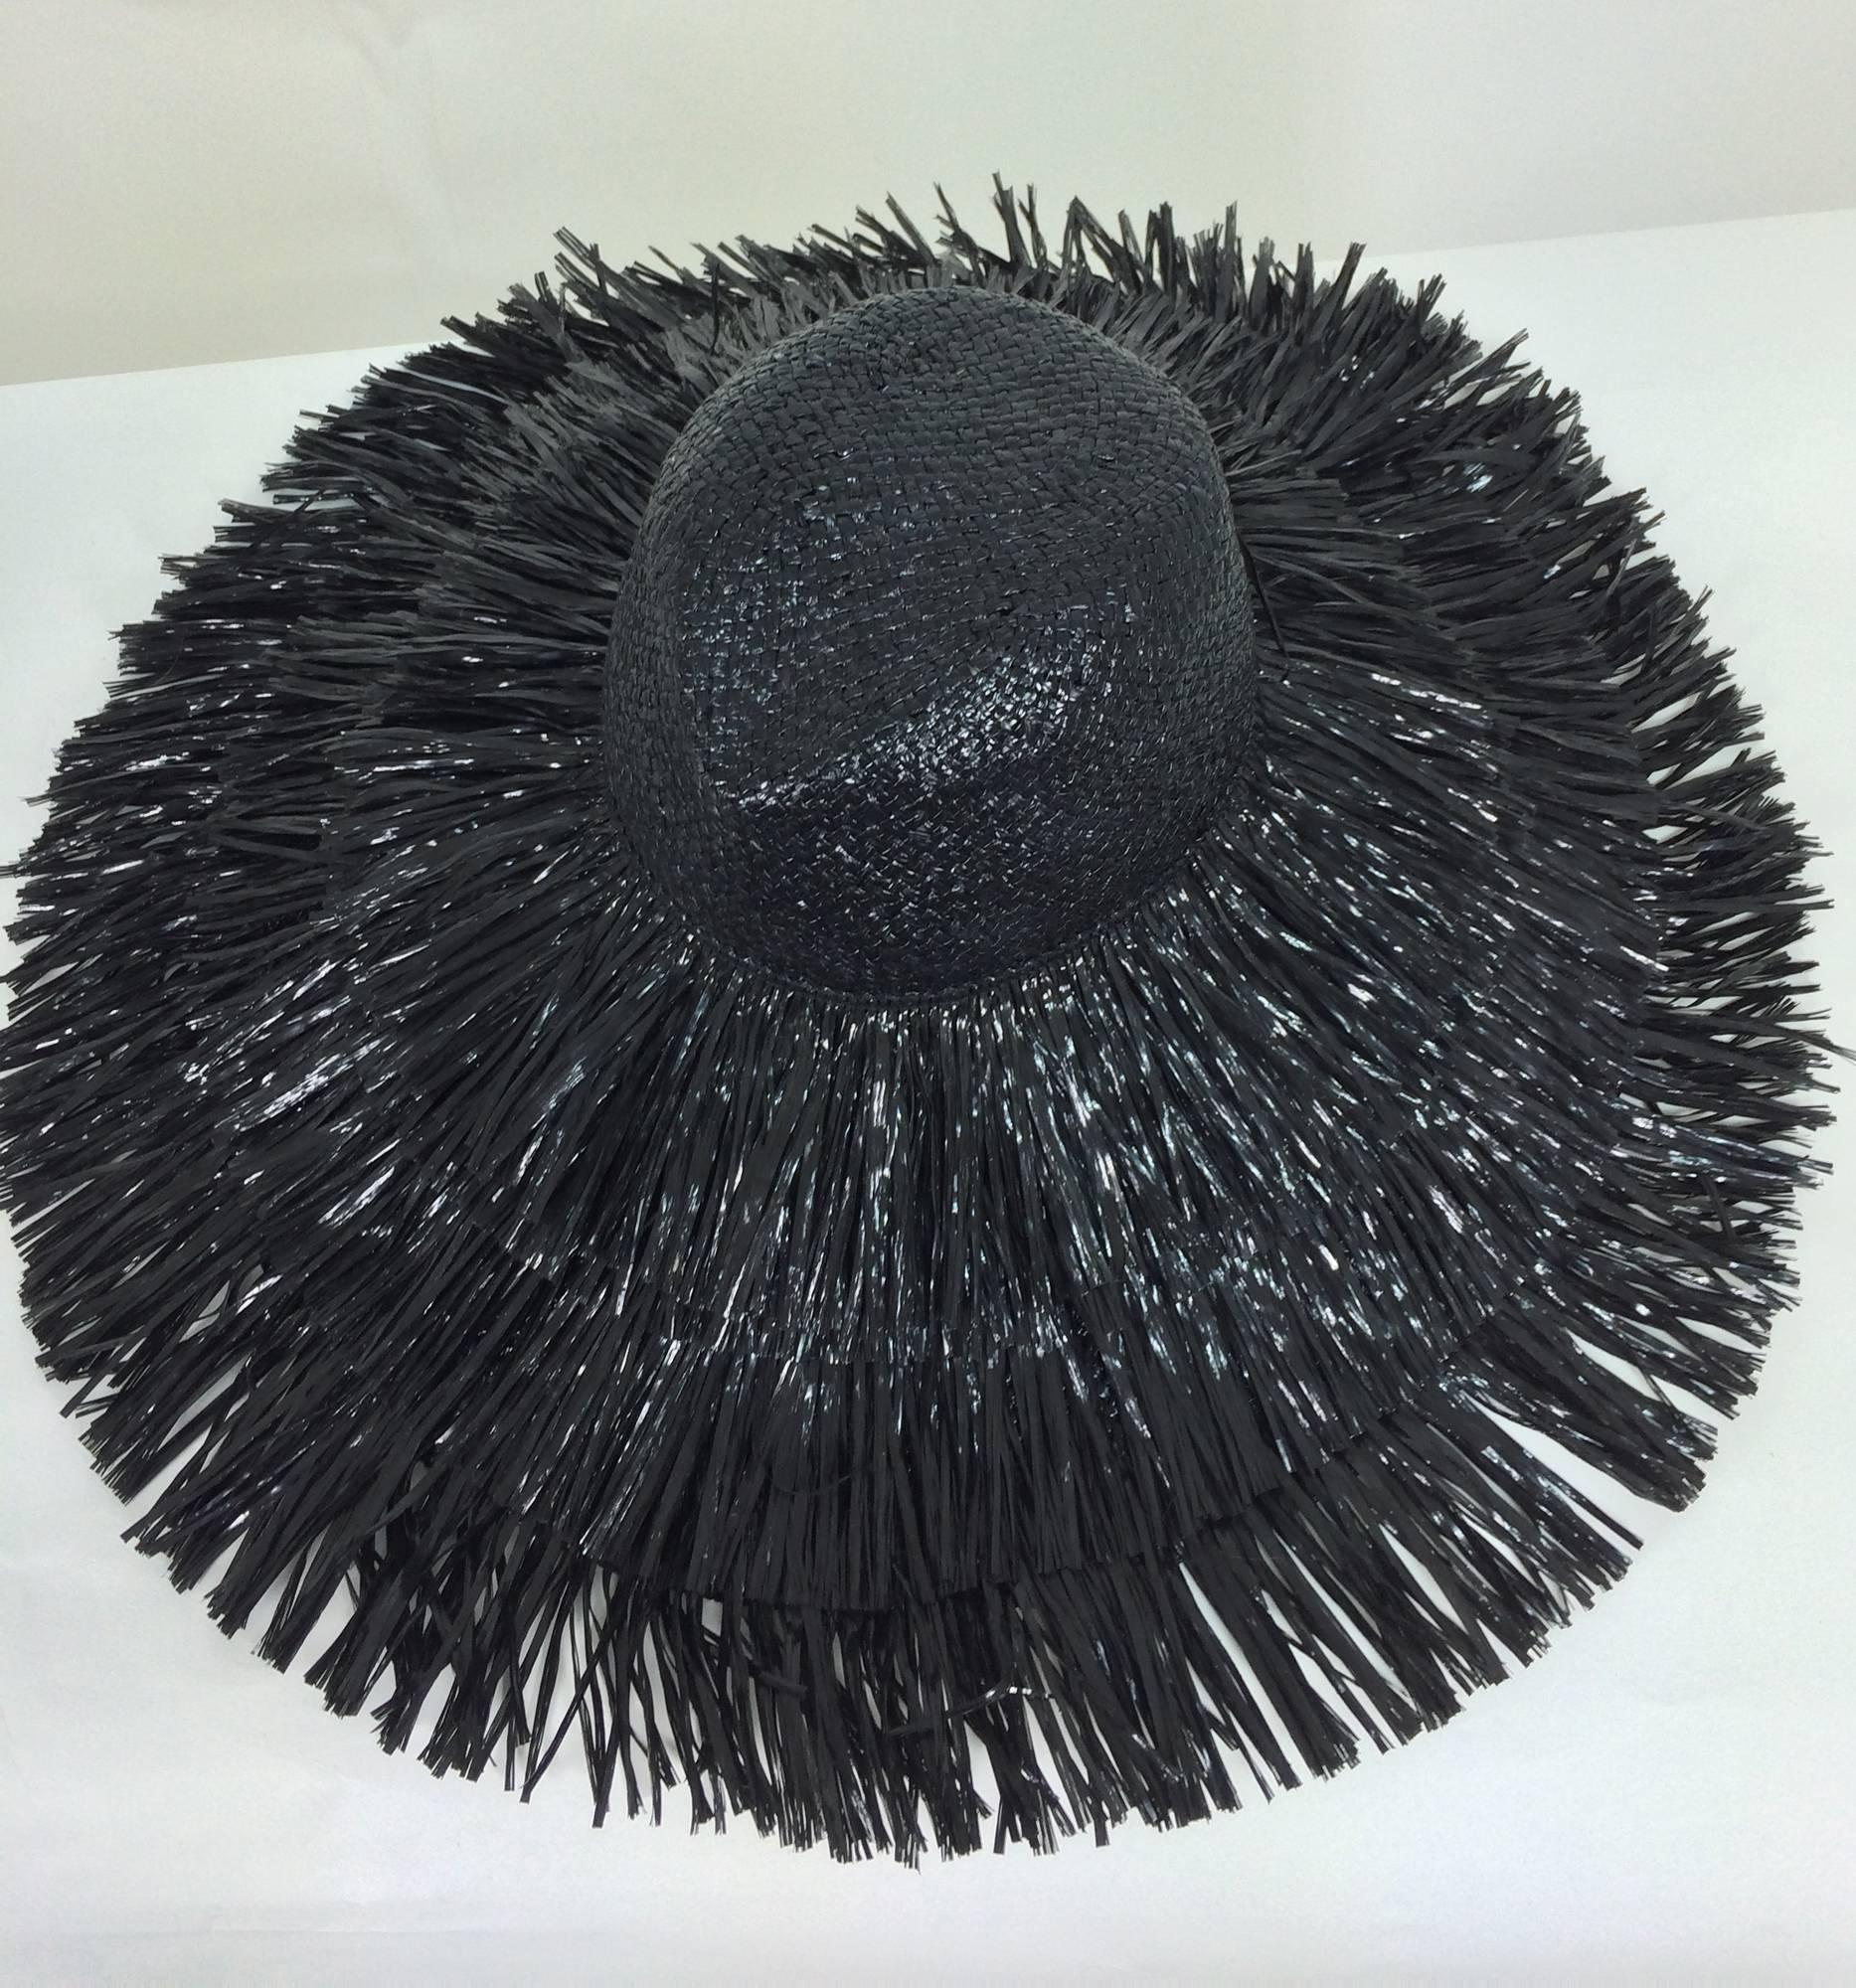 Vintage Eric Javits glazed black straw shaggy fringe wide brim hat 1980s...This is a great hat with a very retro 60s look...Glazed black straw hat has a shaped crown, the brim is covered in shaggy shinny black raffia straw...Wide black gros grain